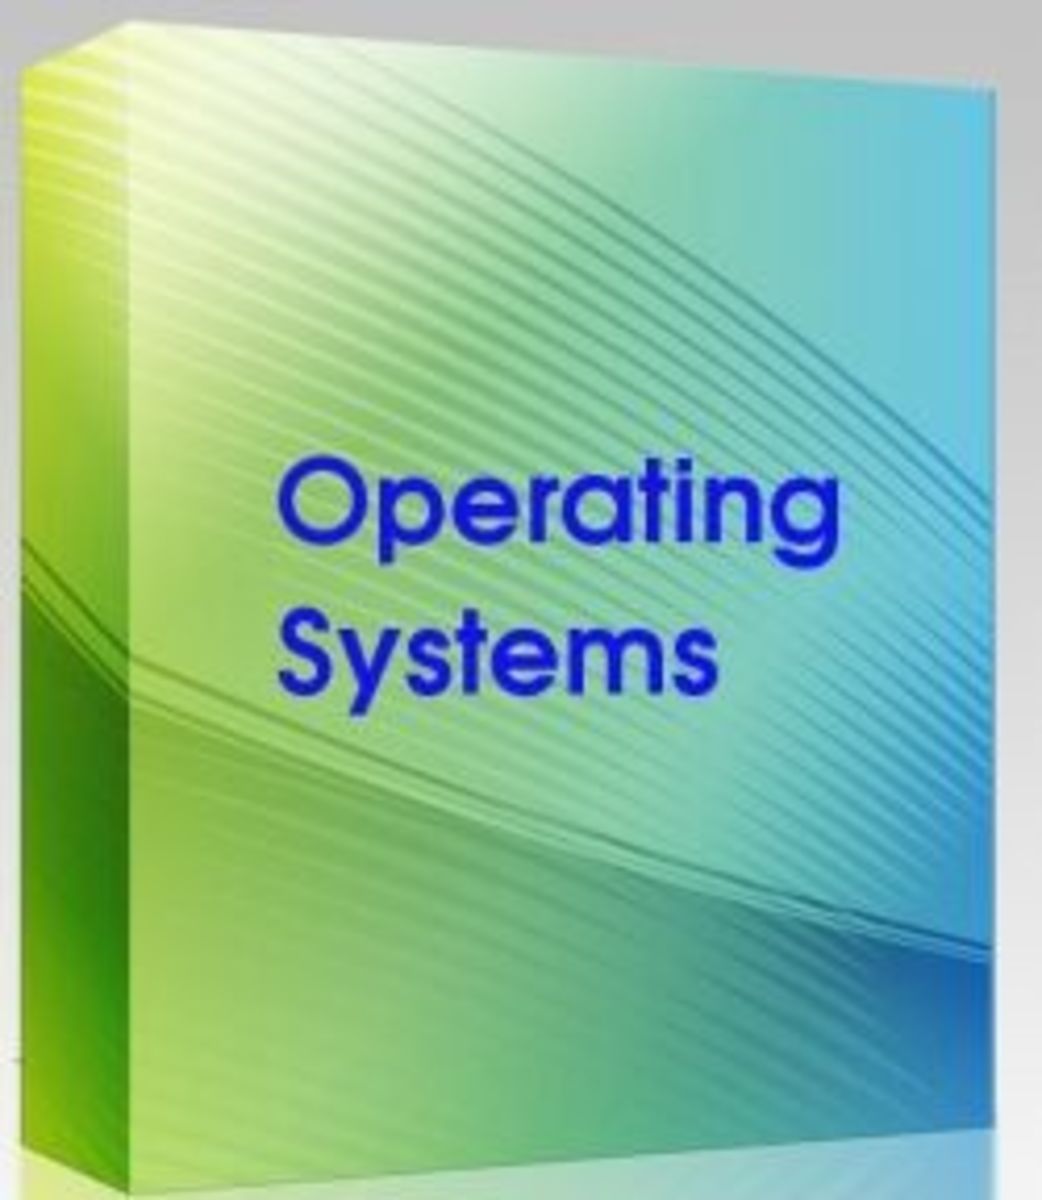 Operating System PC